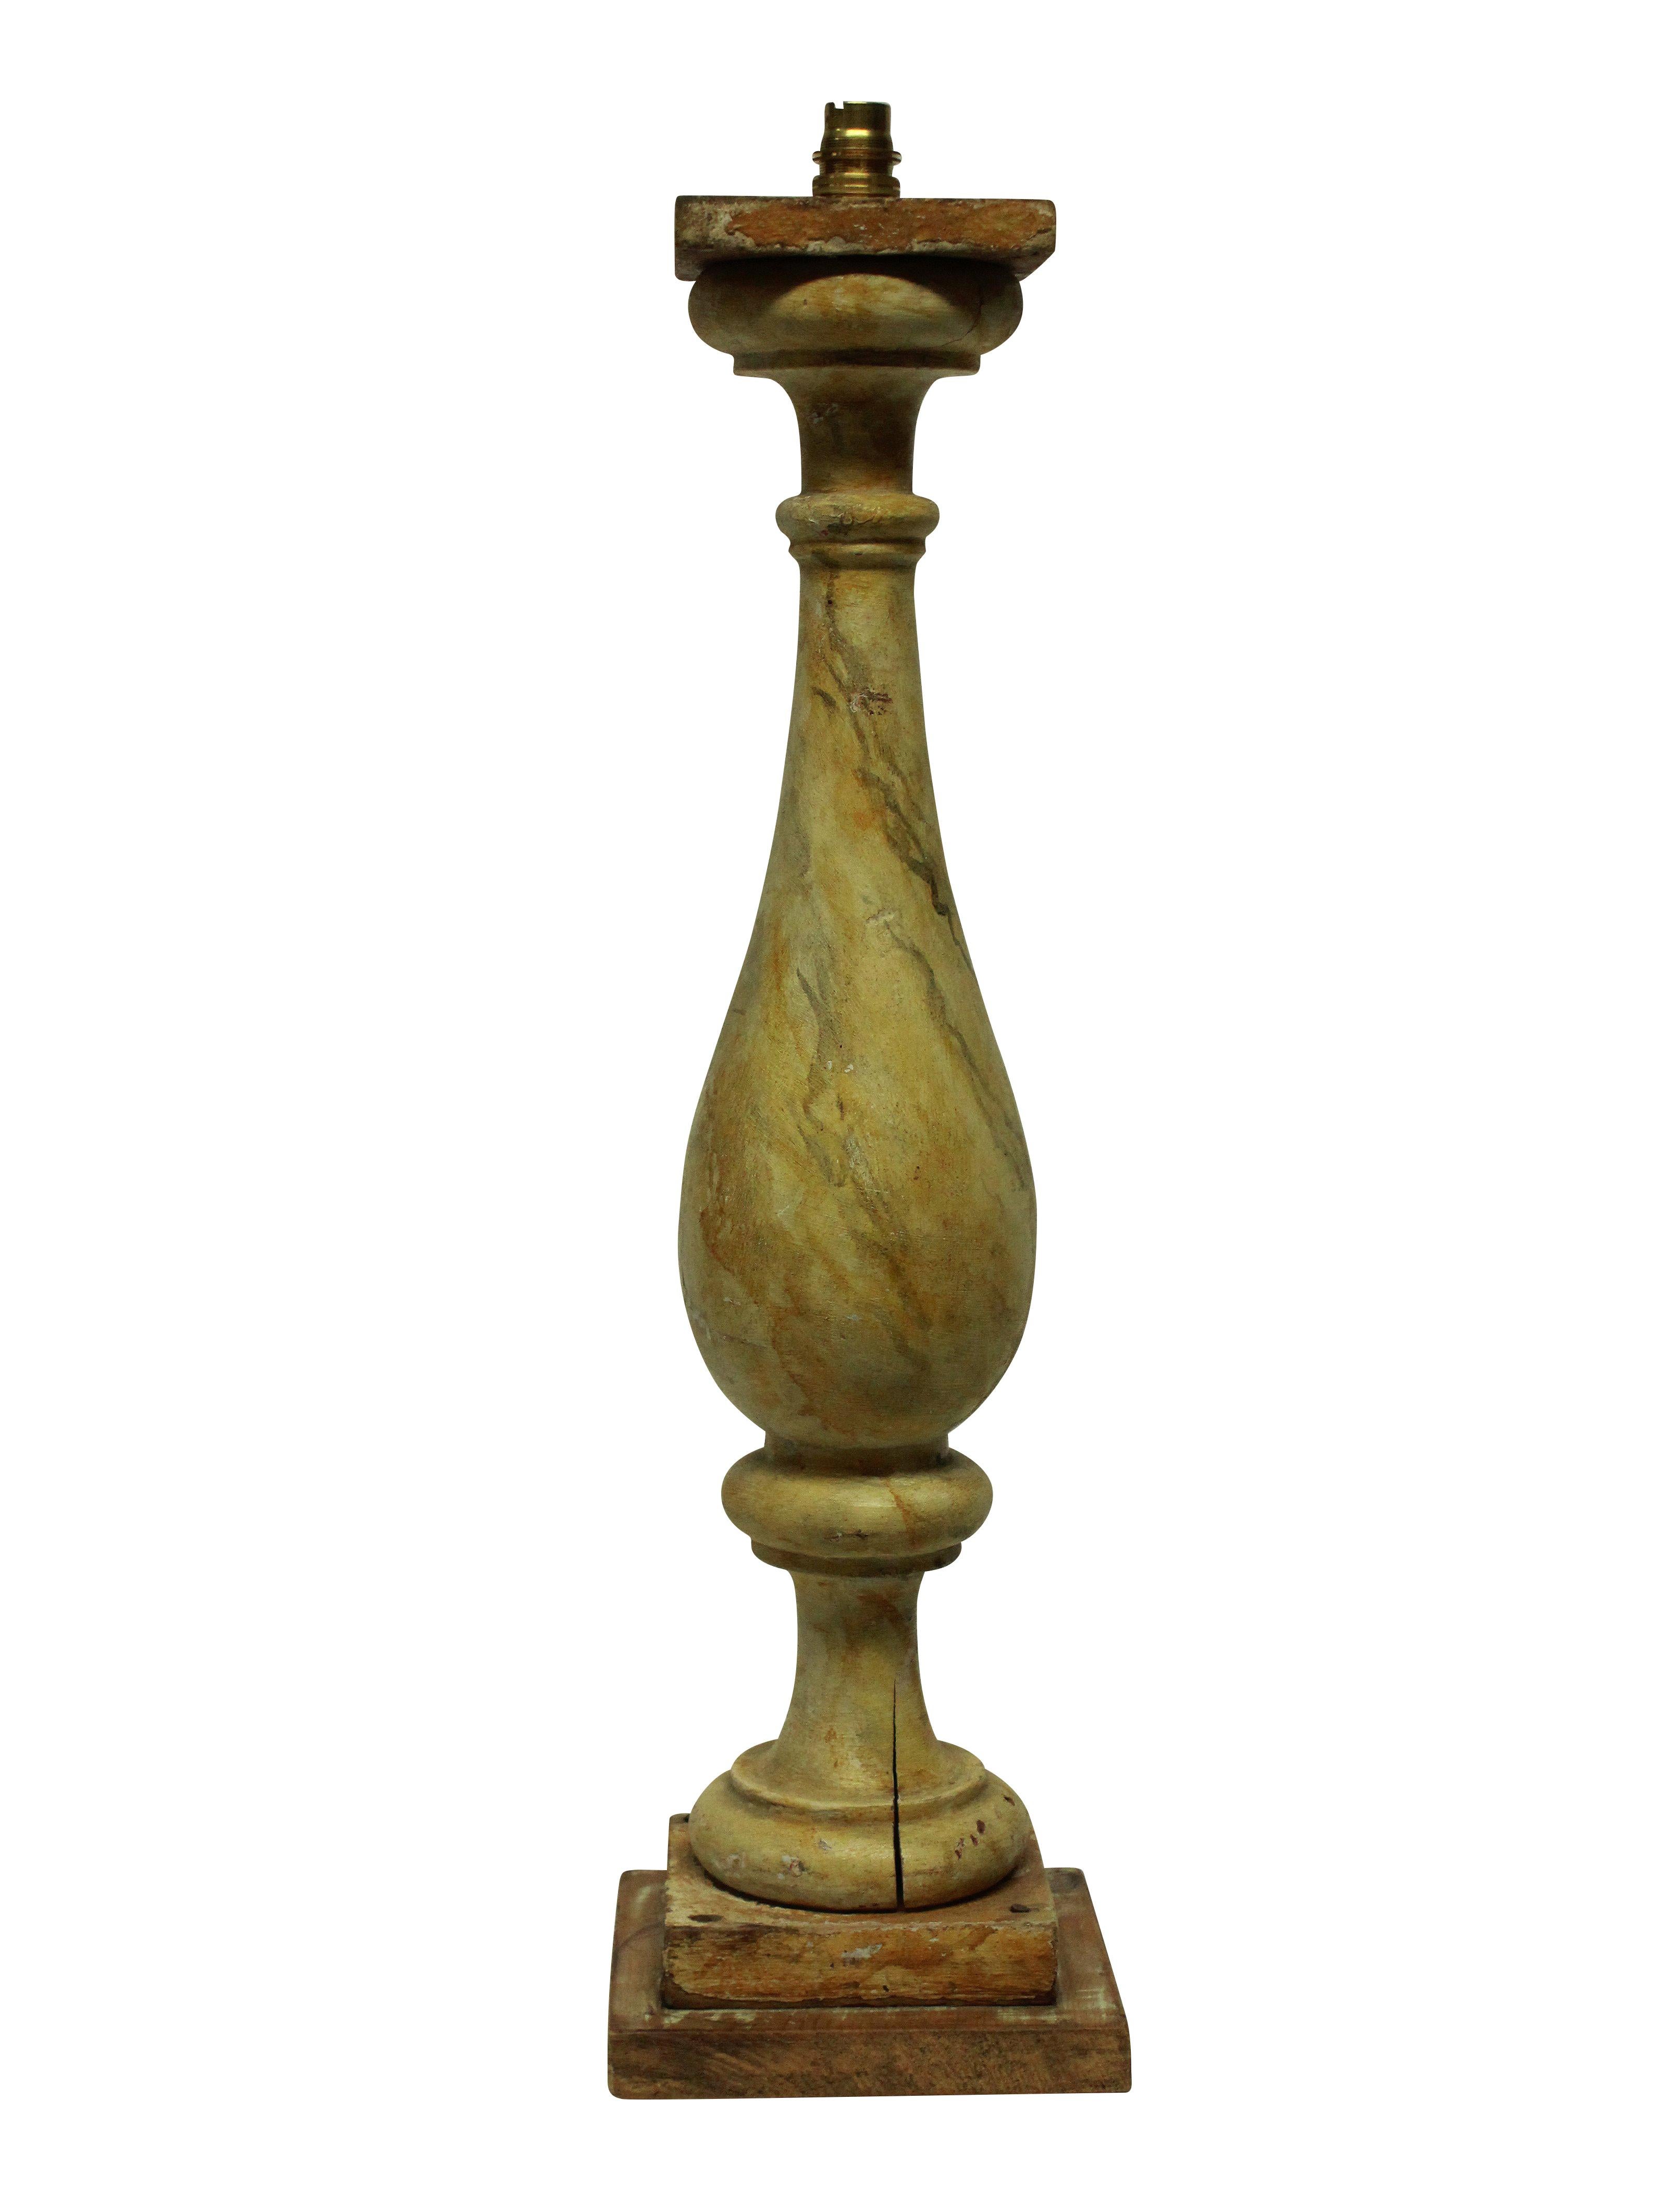 A pair of large English carved wood balustrade lamps, decorated in faux Sienna marble.